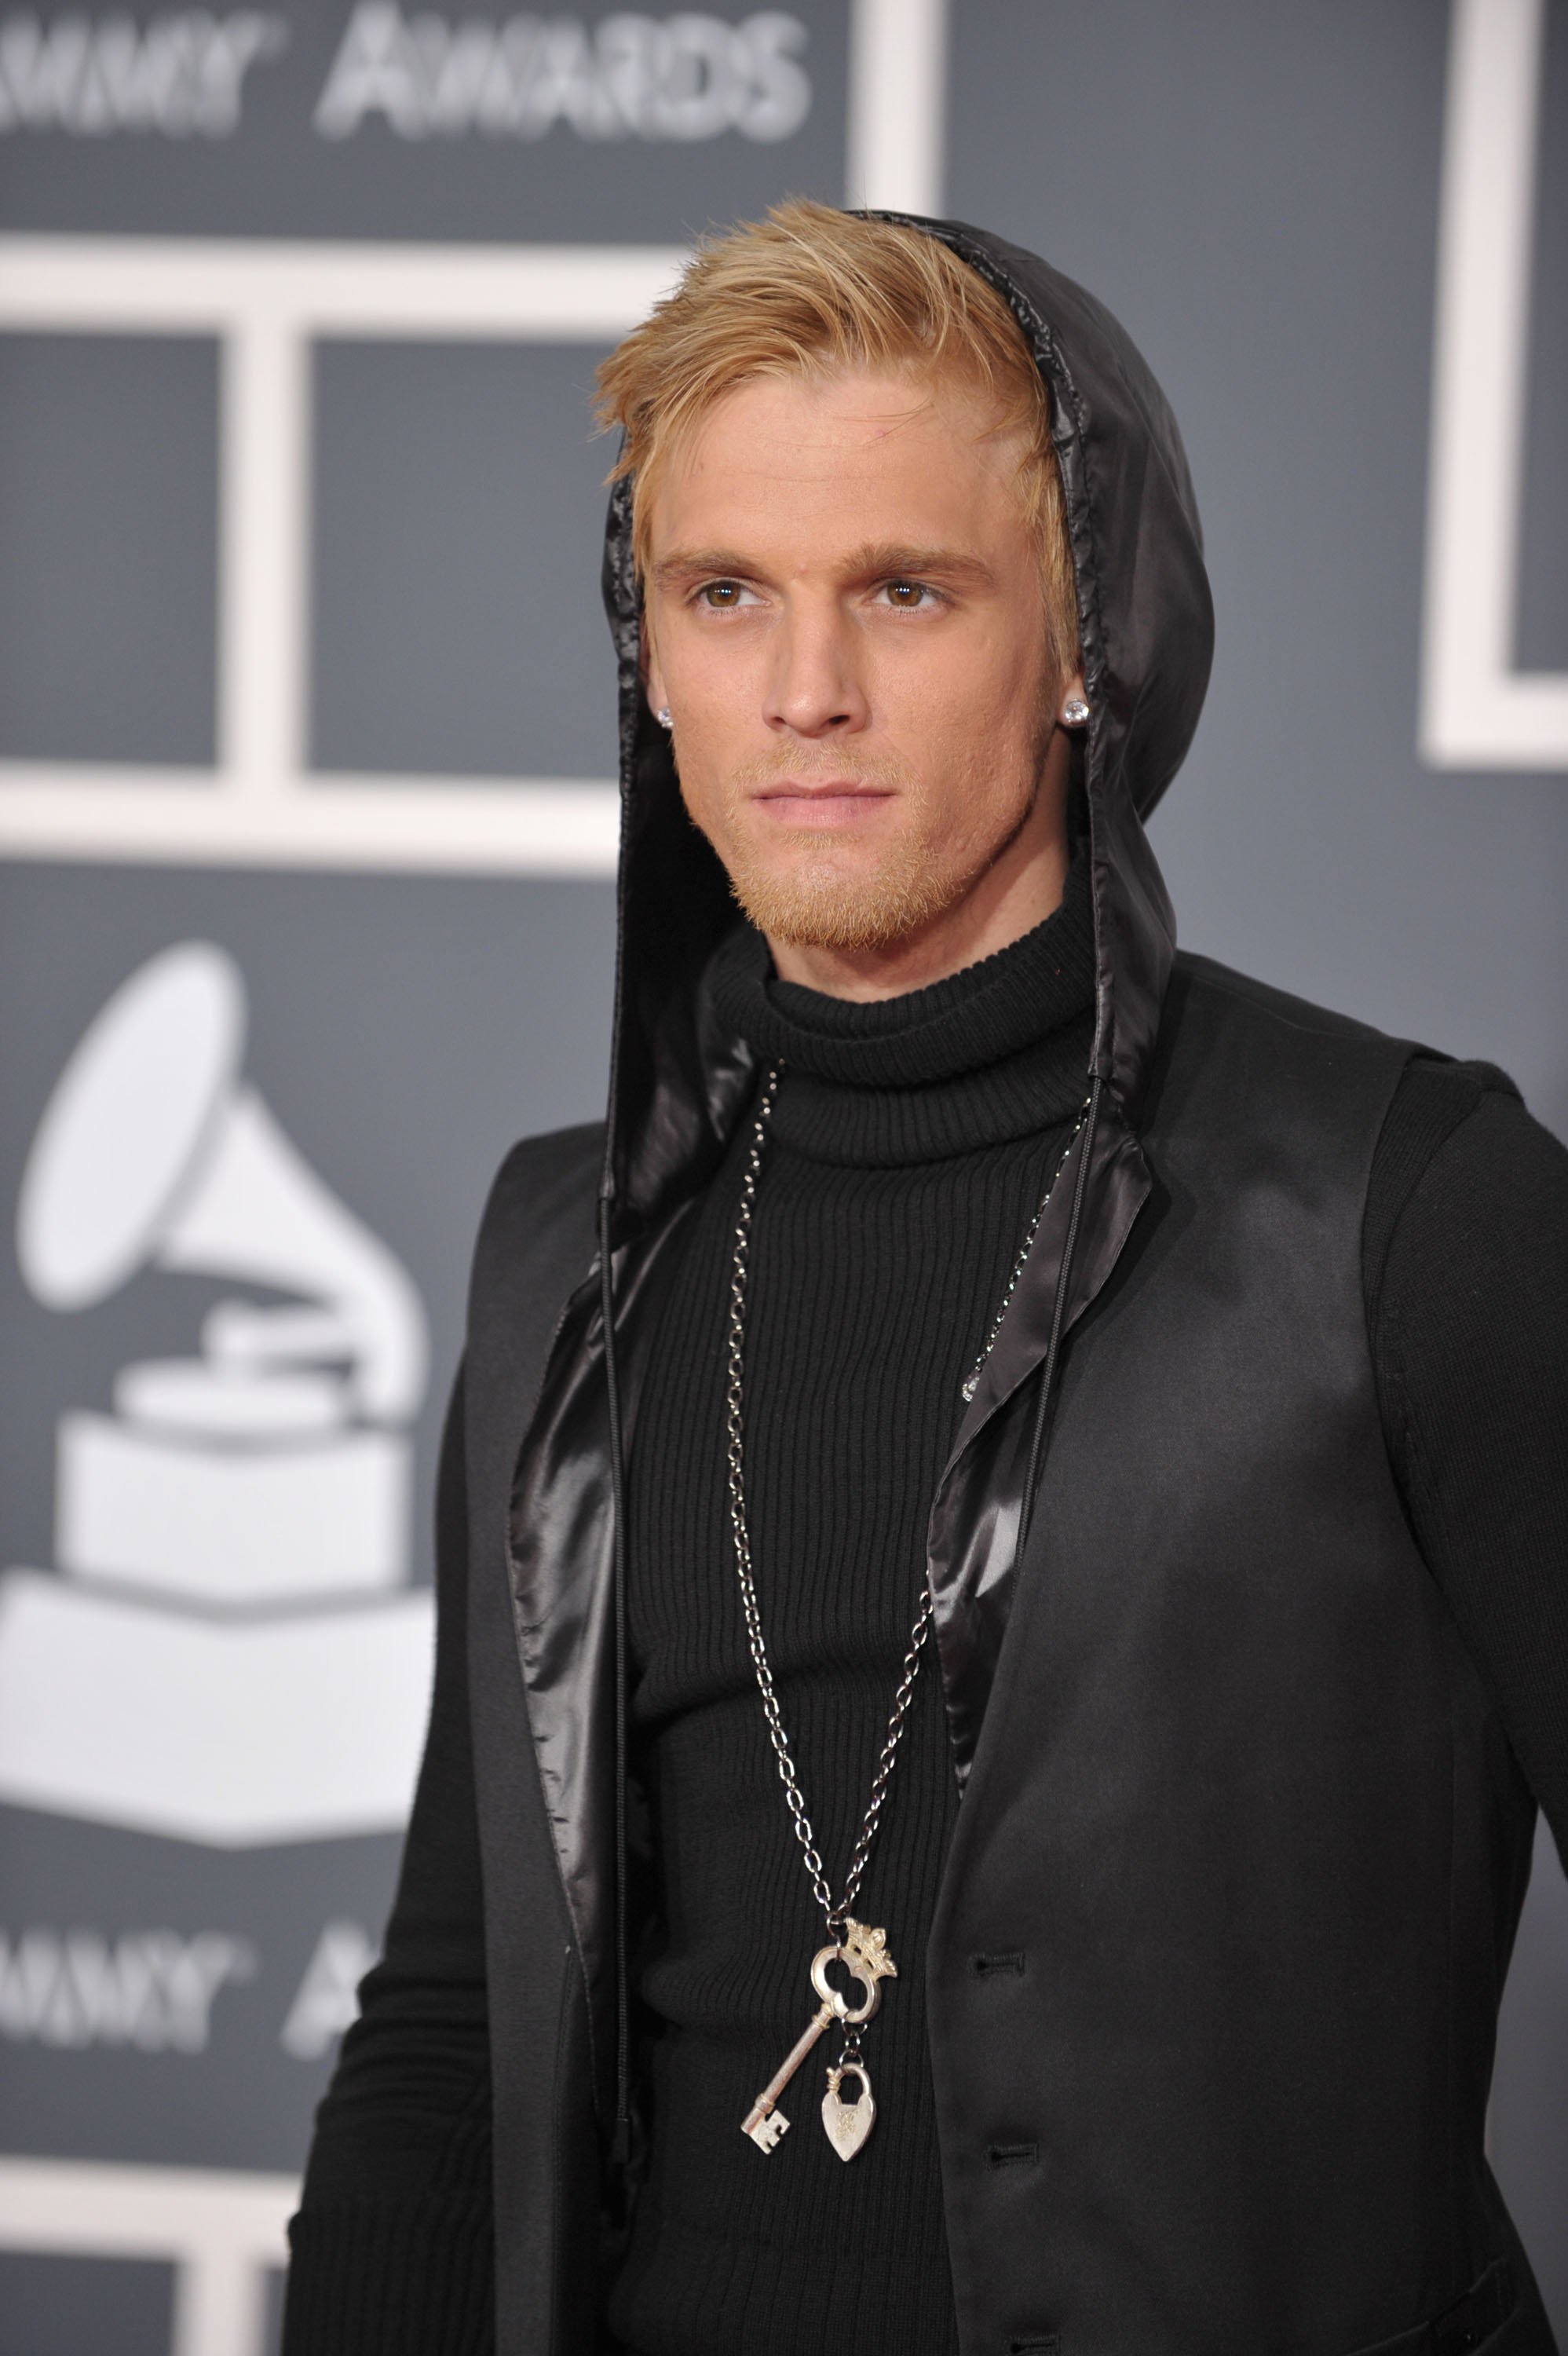 Aaron Carter at the 52nd Annual Grammy Awards, 2010, Los Angeles, California. | Photo: Getty Images